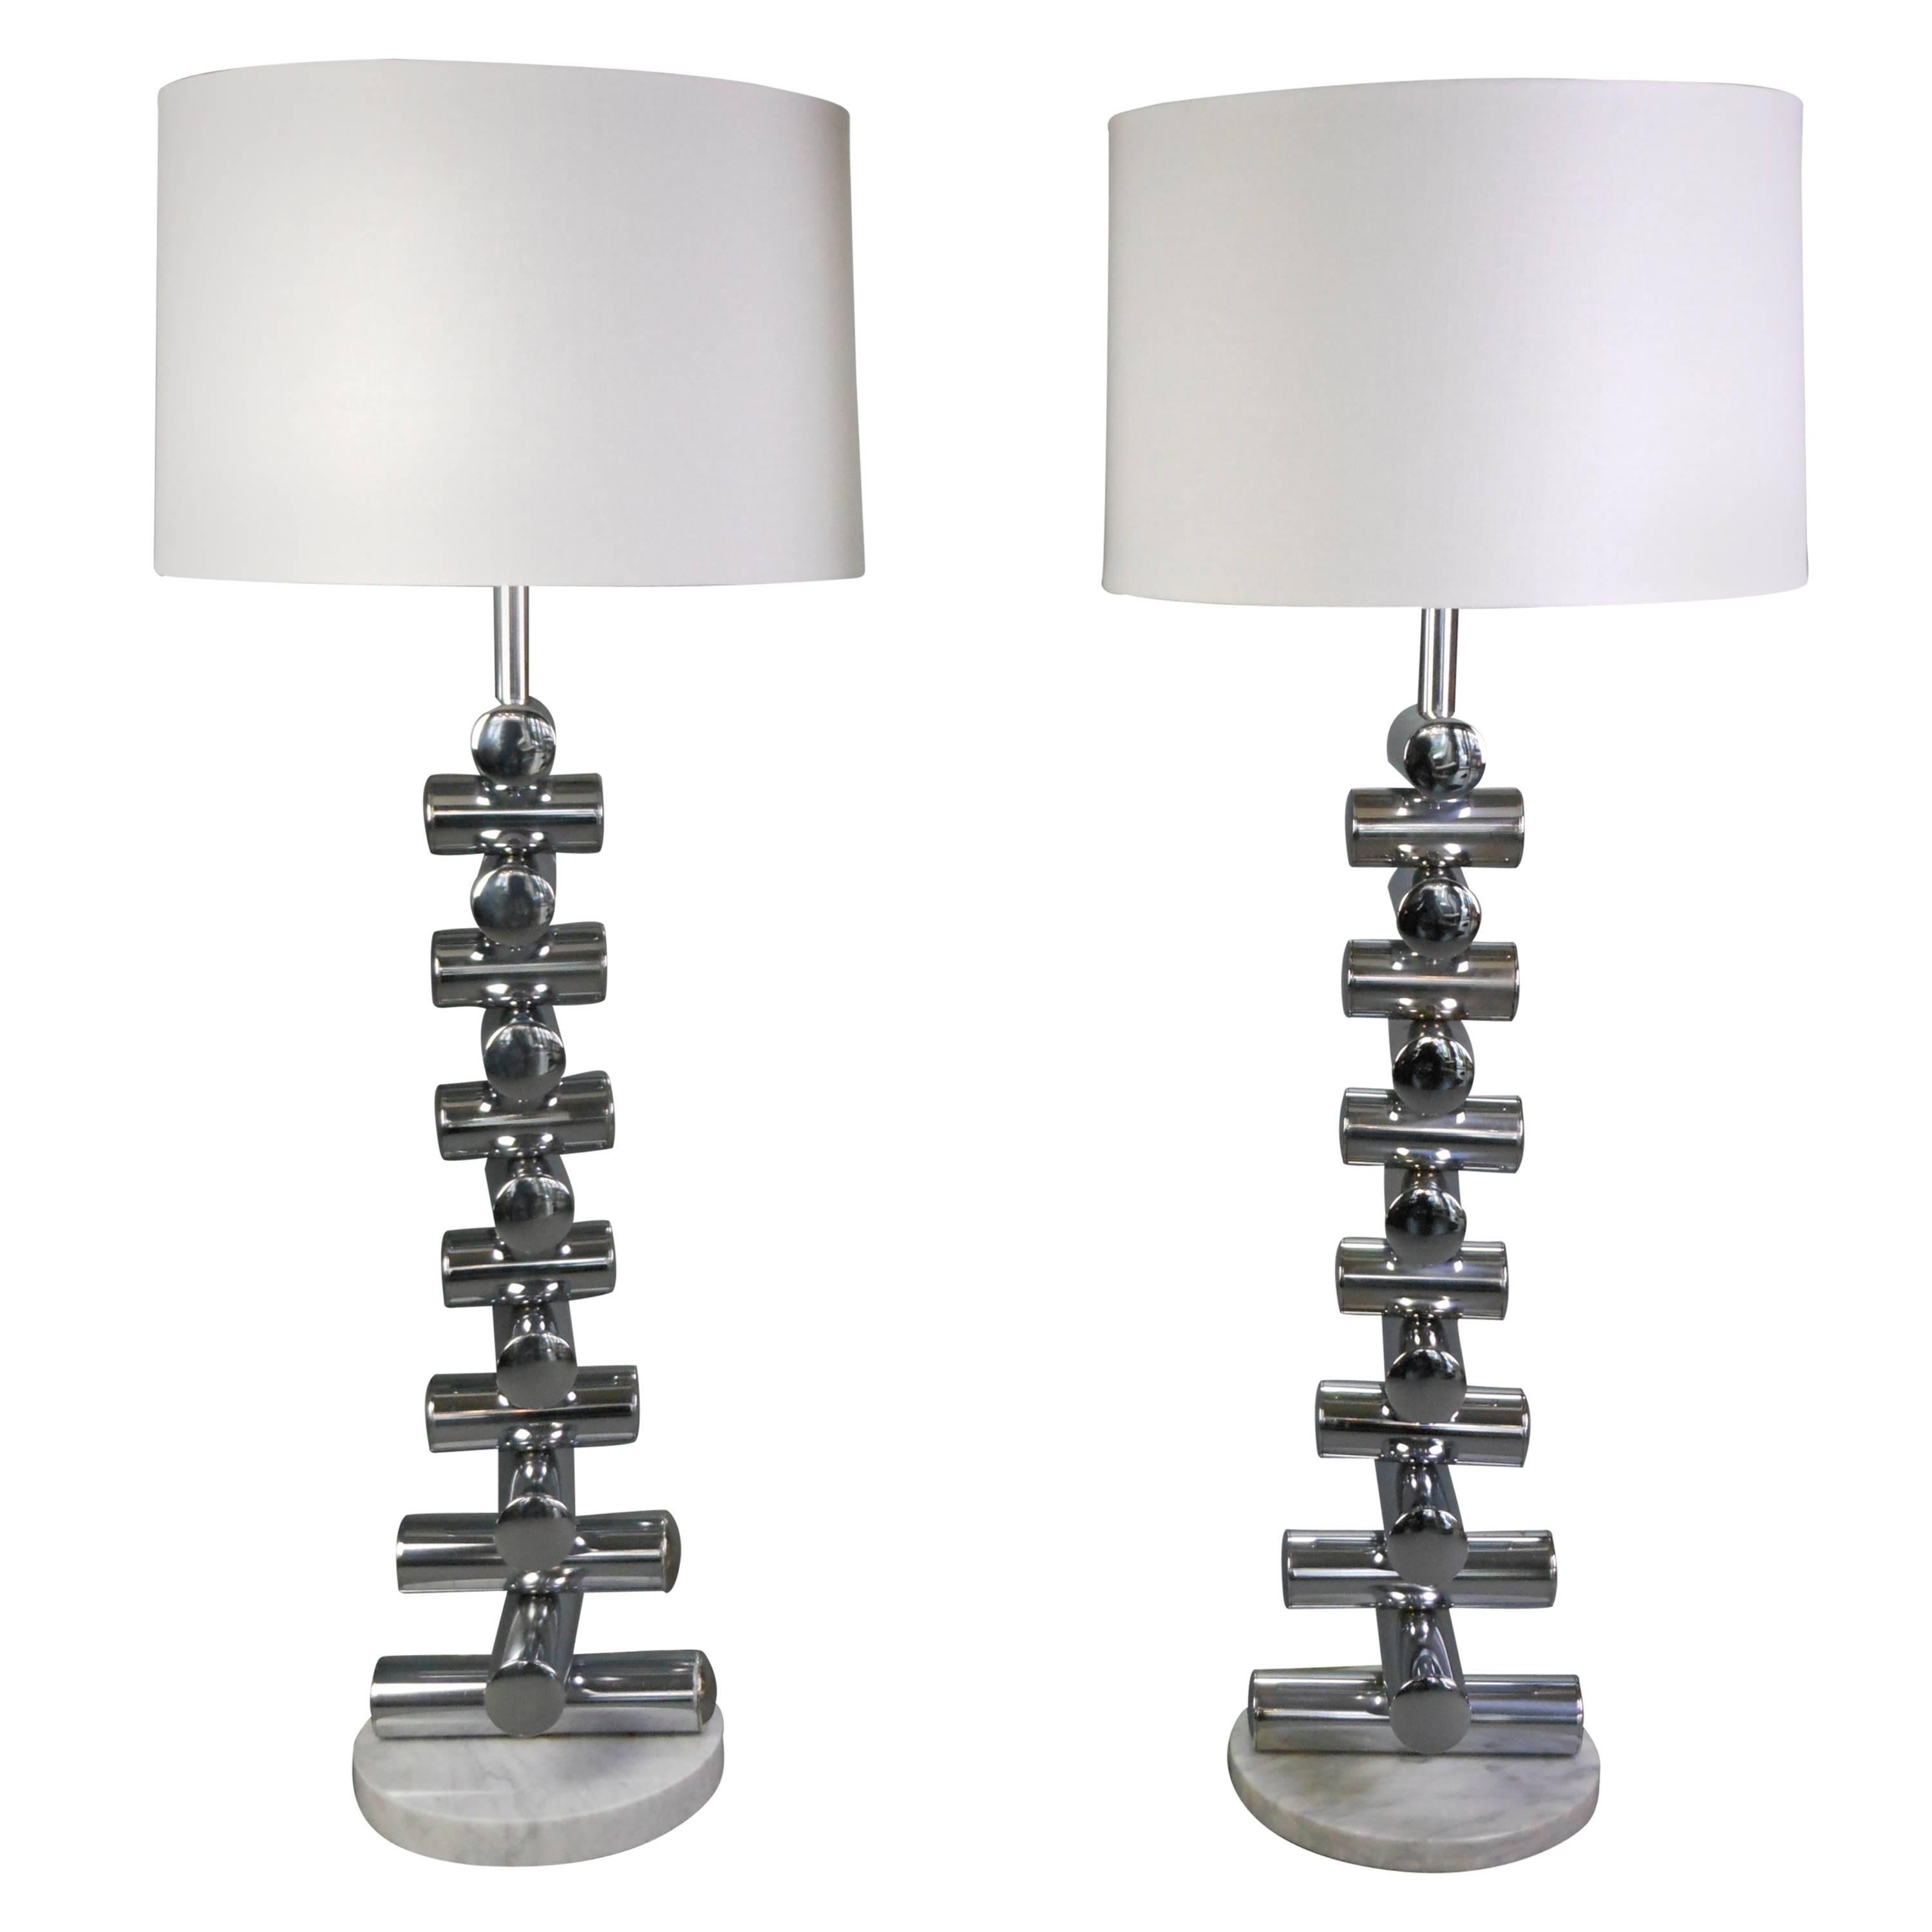 A Matched Pair of Italian Steel and Marble Floor Lamps For Sale